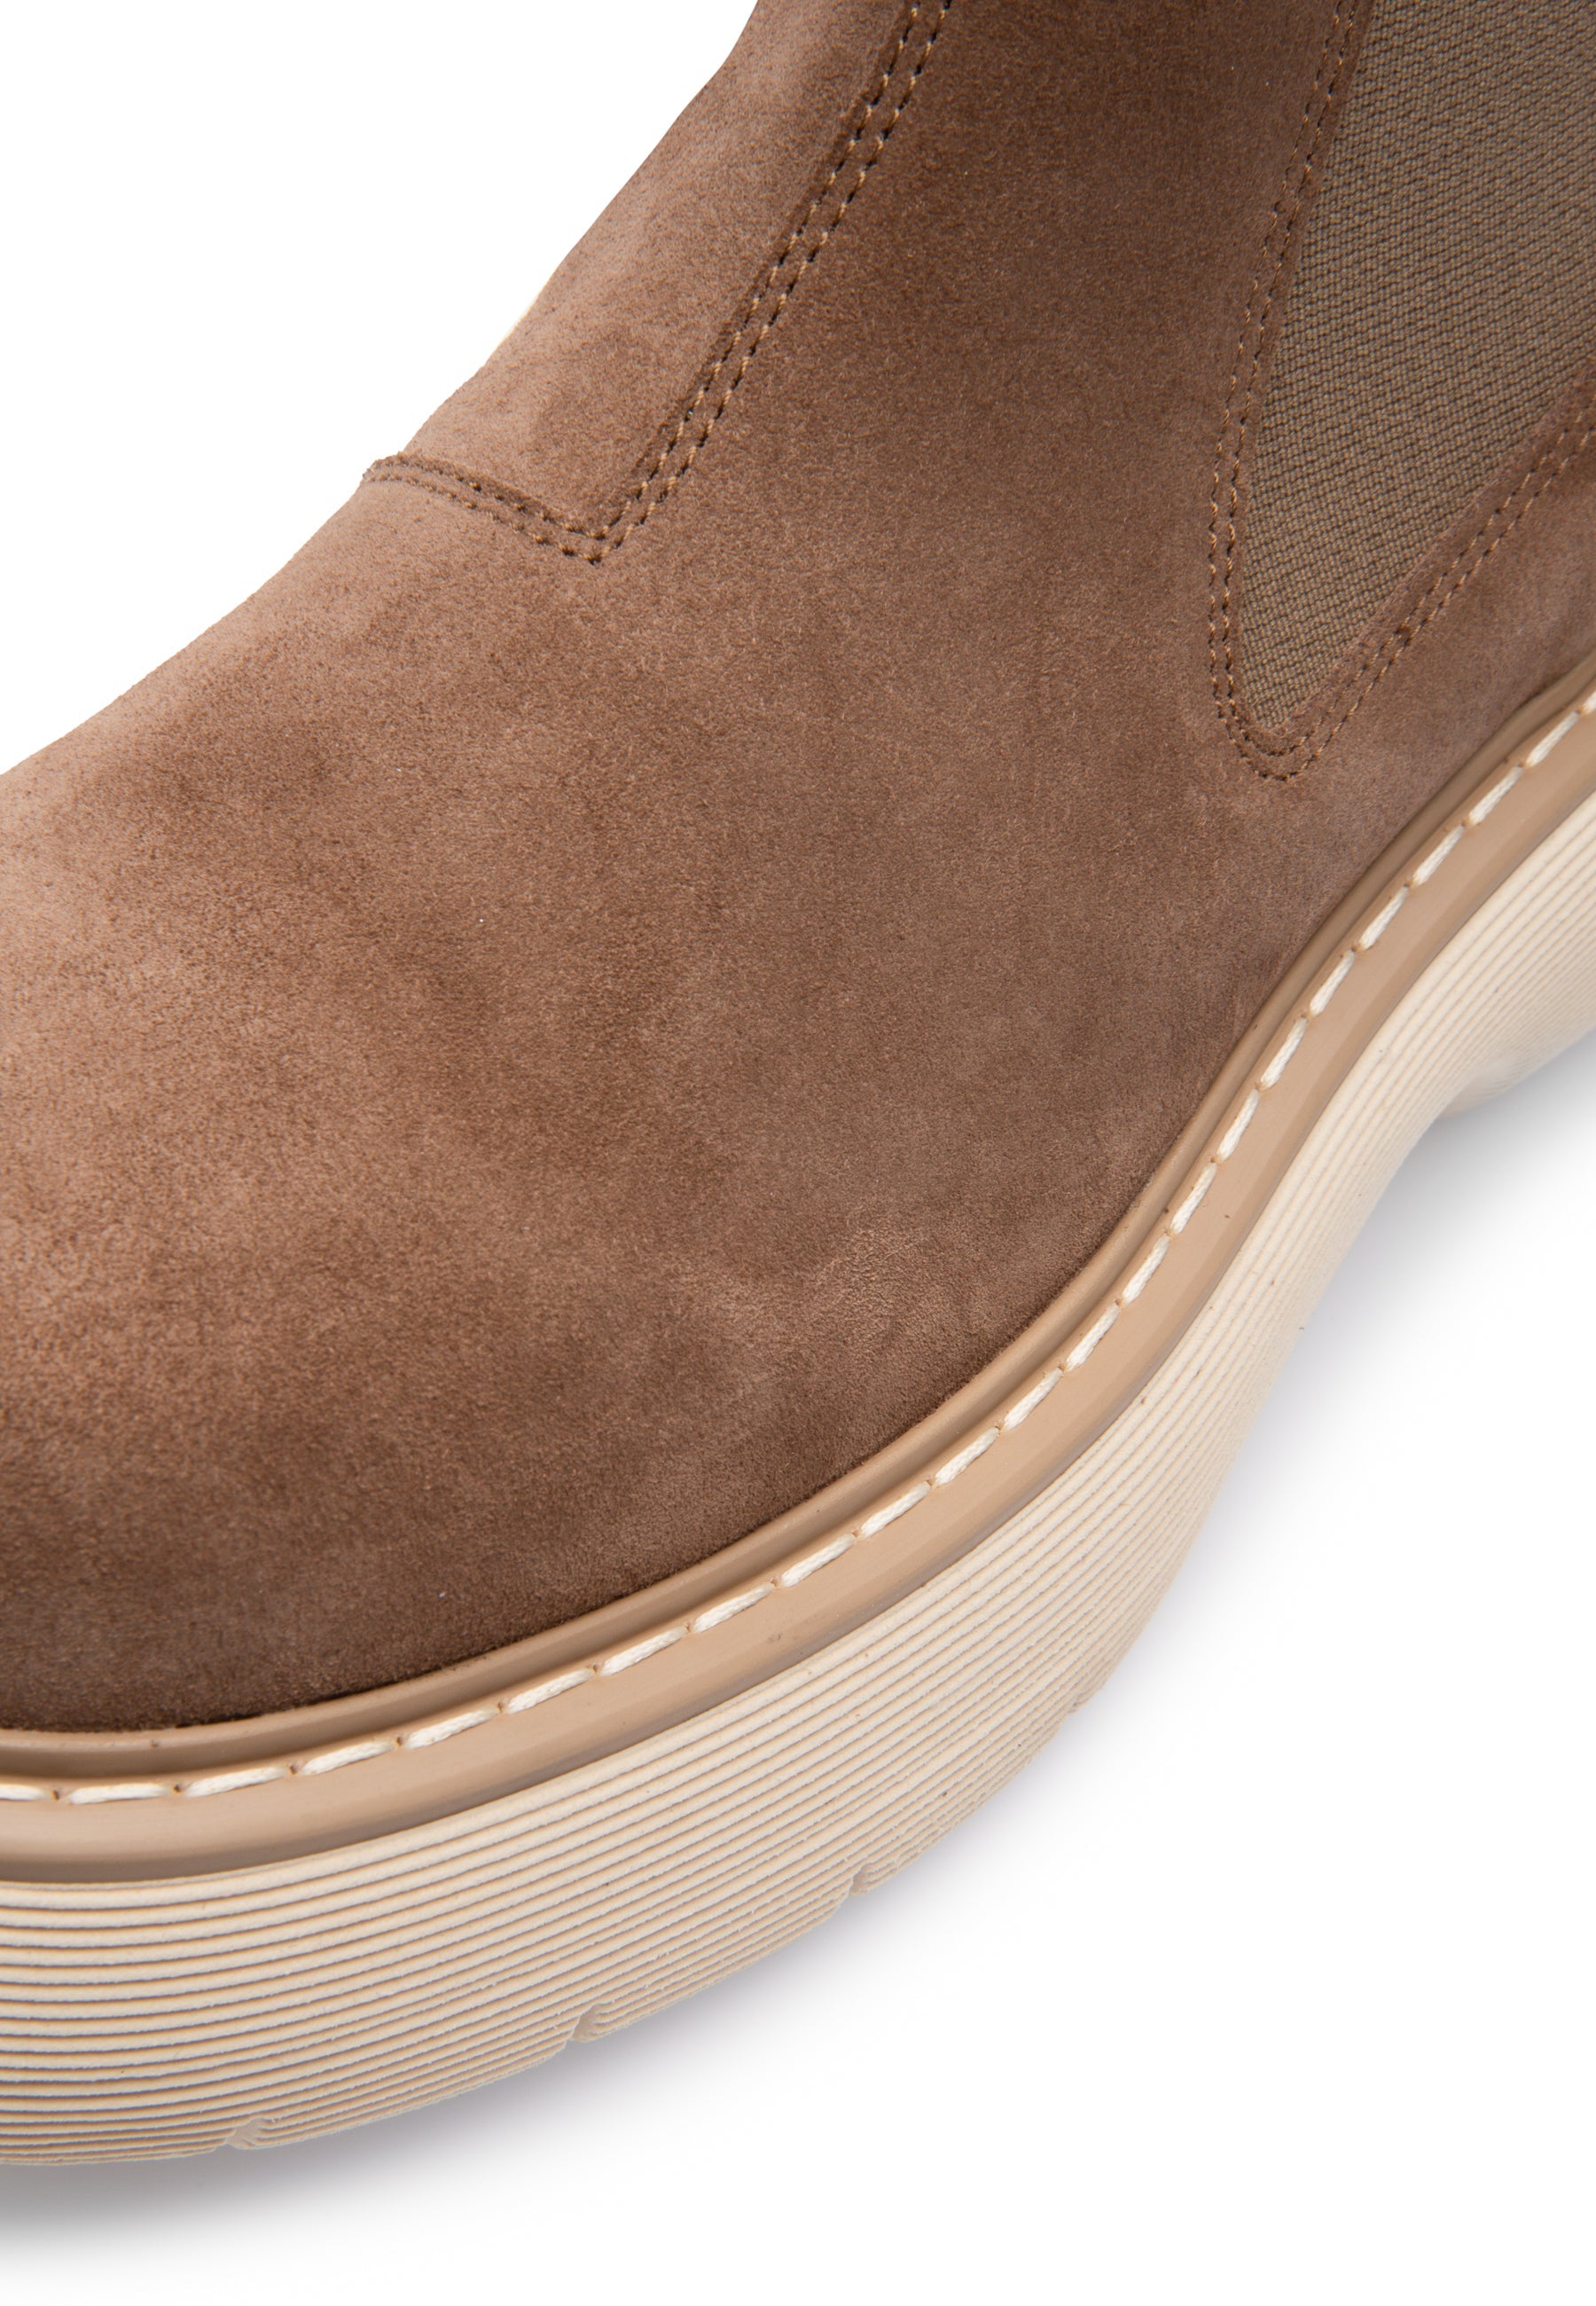 Ella Taupe Suede Leather Chelsea Boots LAST1527 - 6